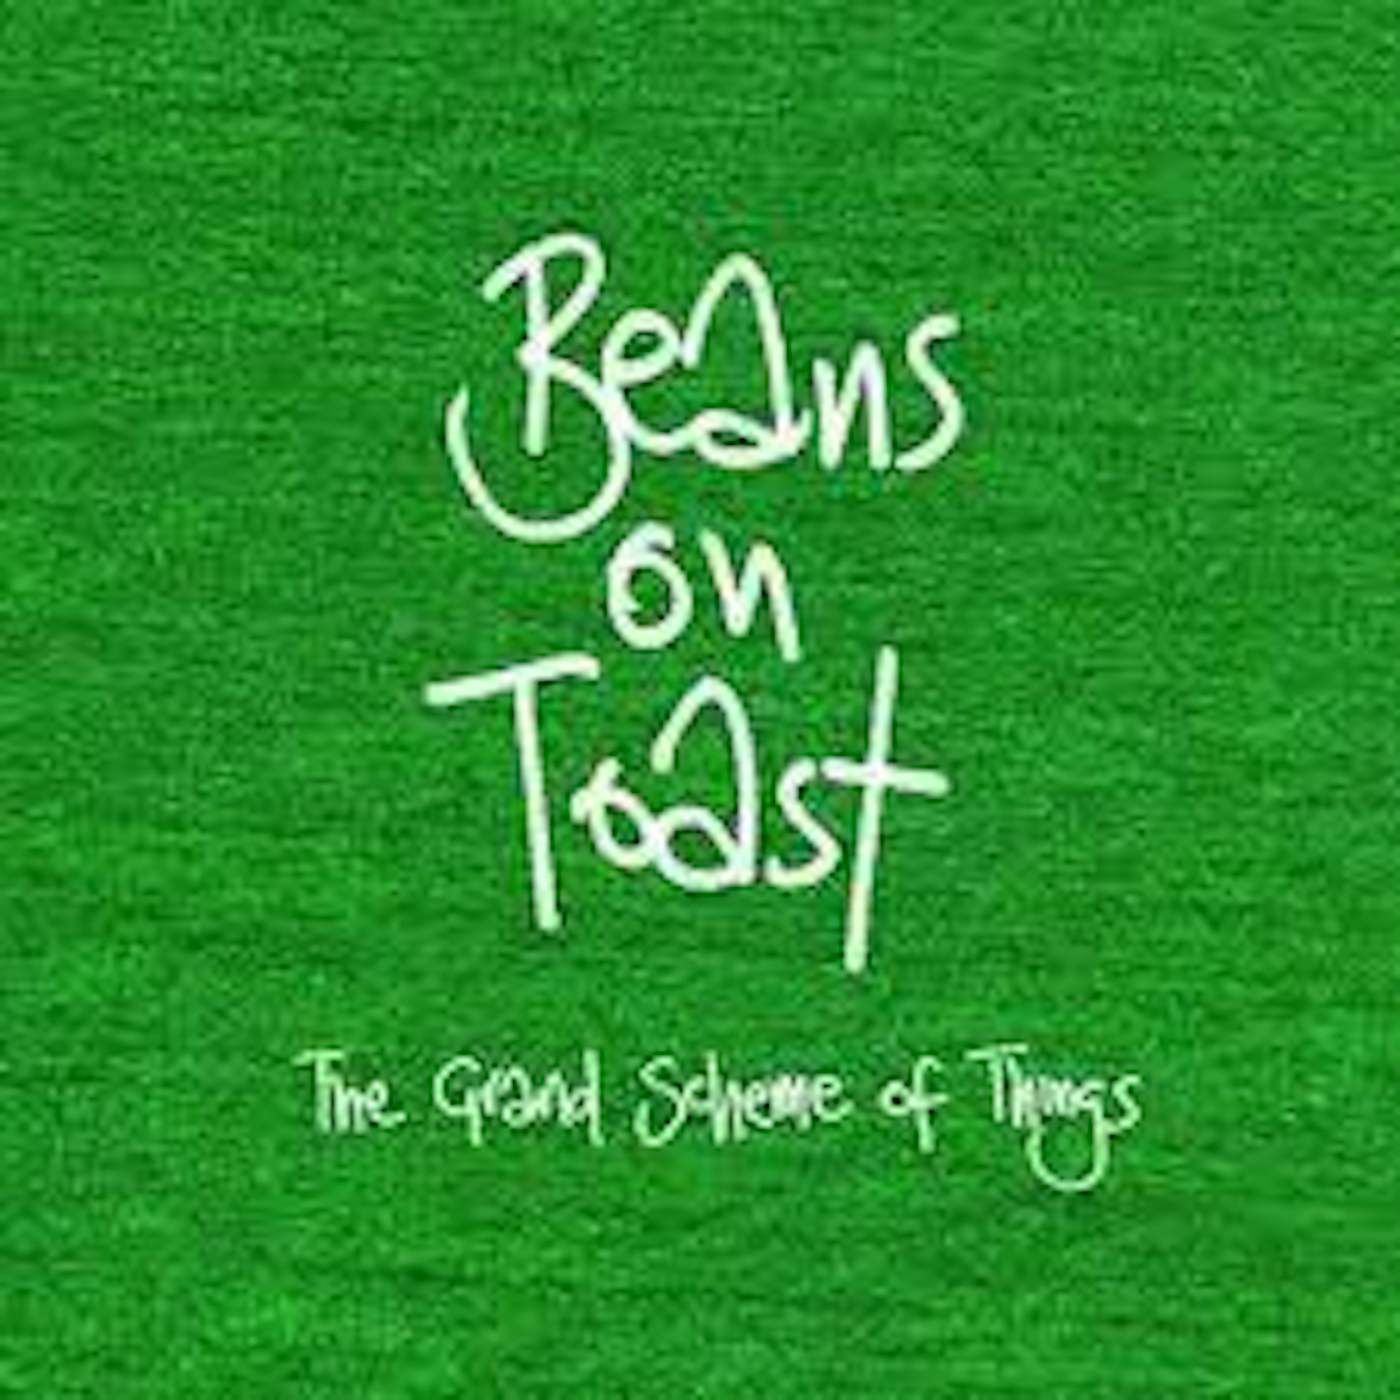 Beans on Toast GRAND SCHEME OF THINGS Vinyl Record - UK Release